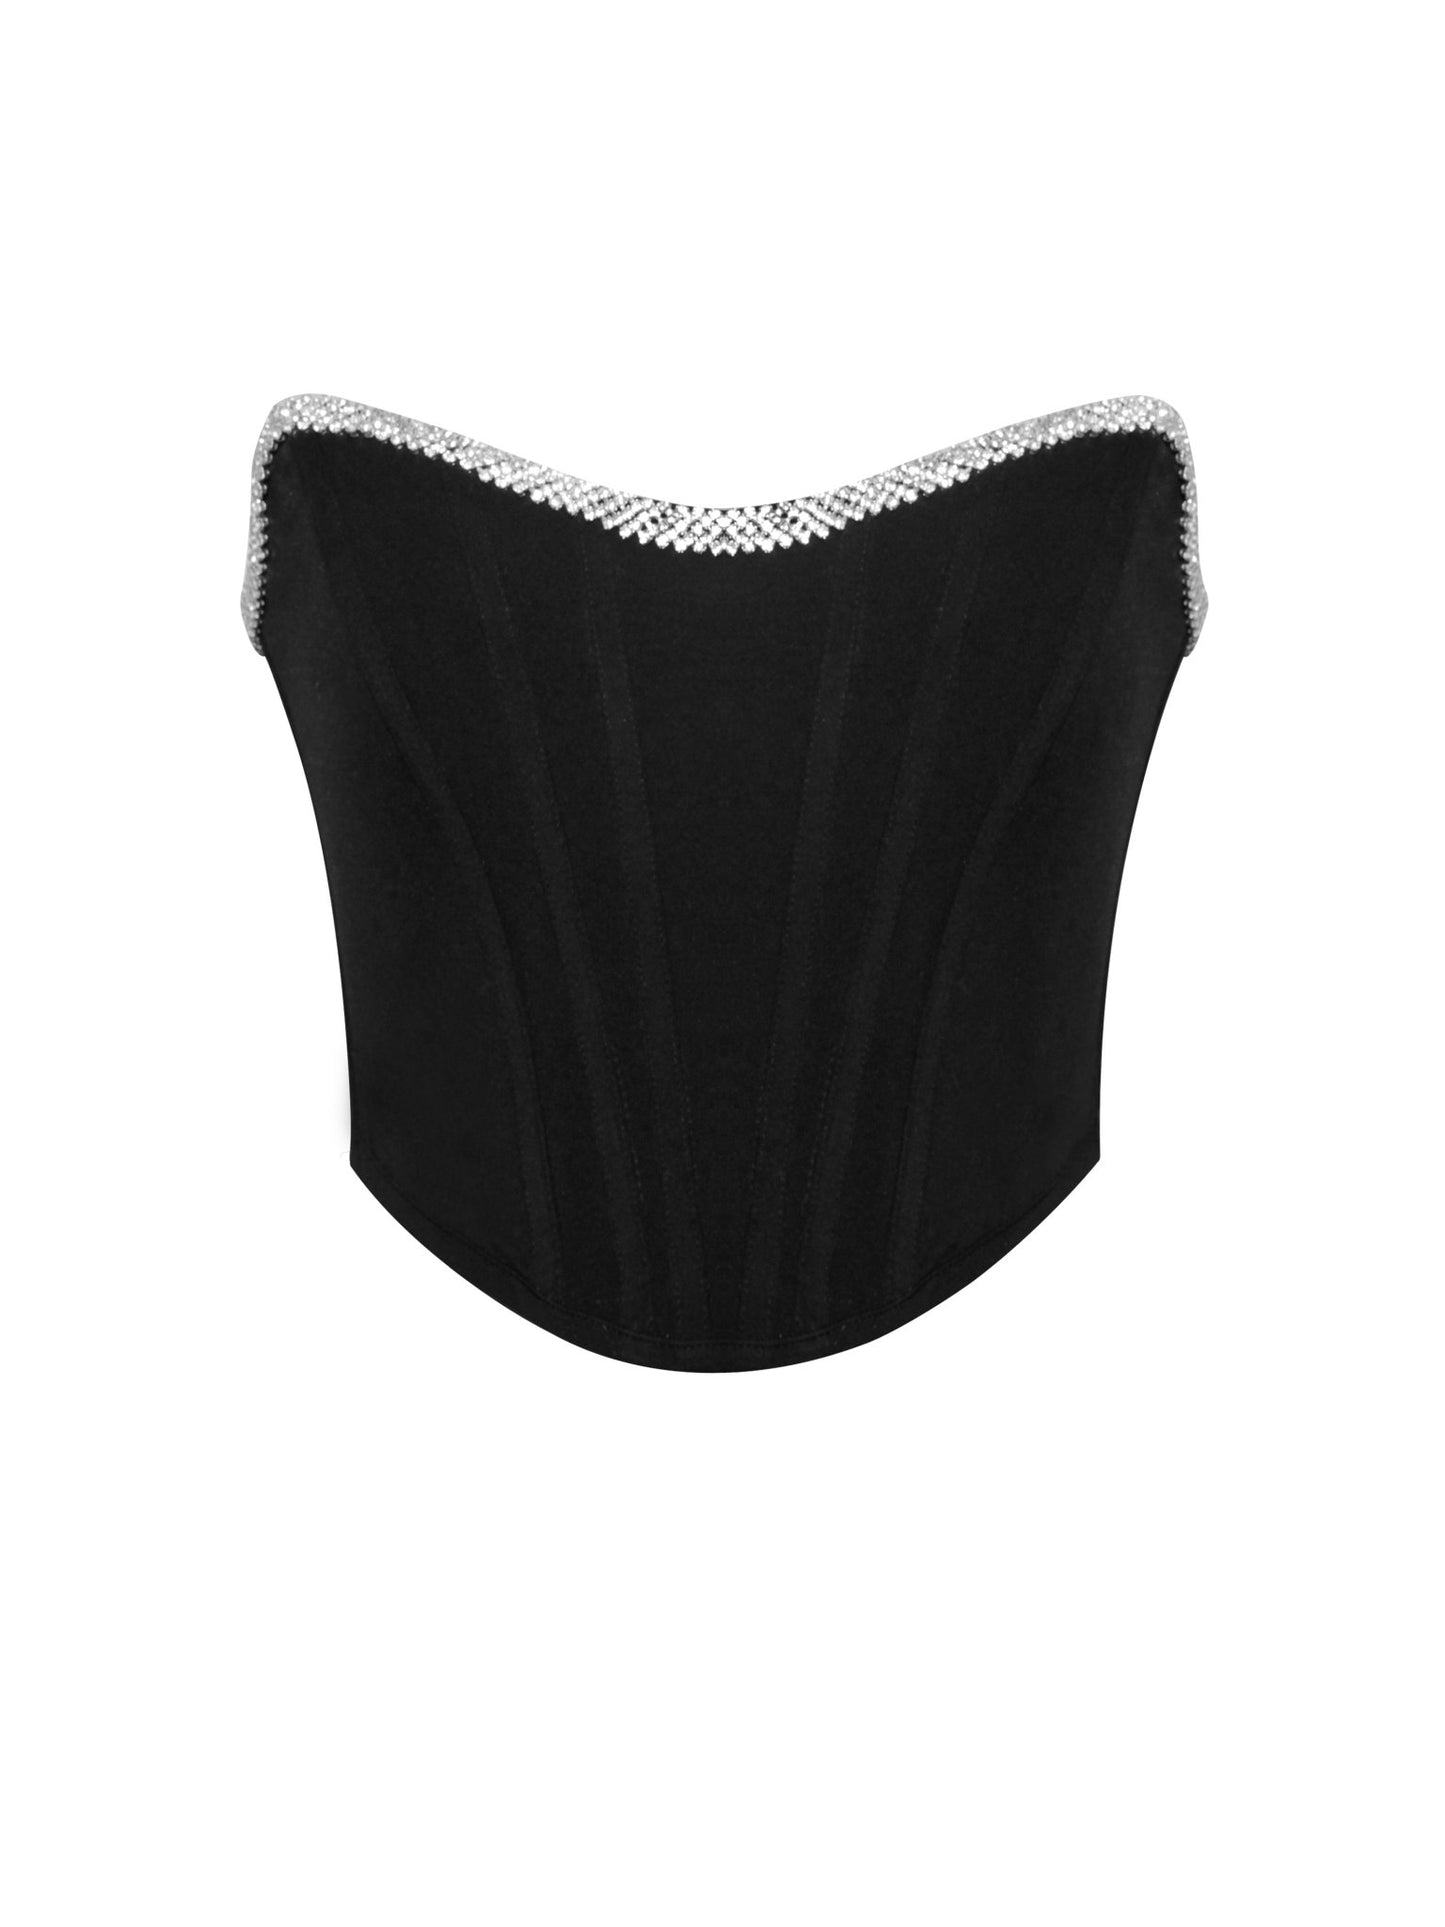 Melanie Black Corset Top With Crystal Trim - HOUSE OF SHE